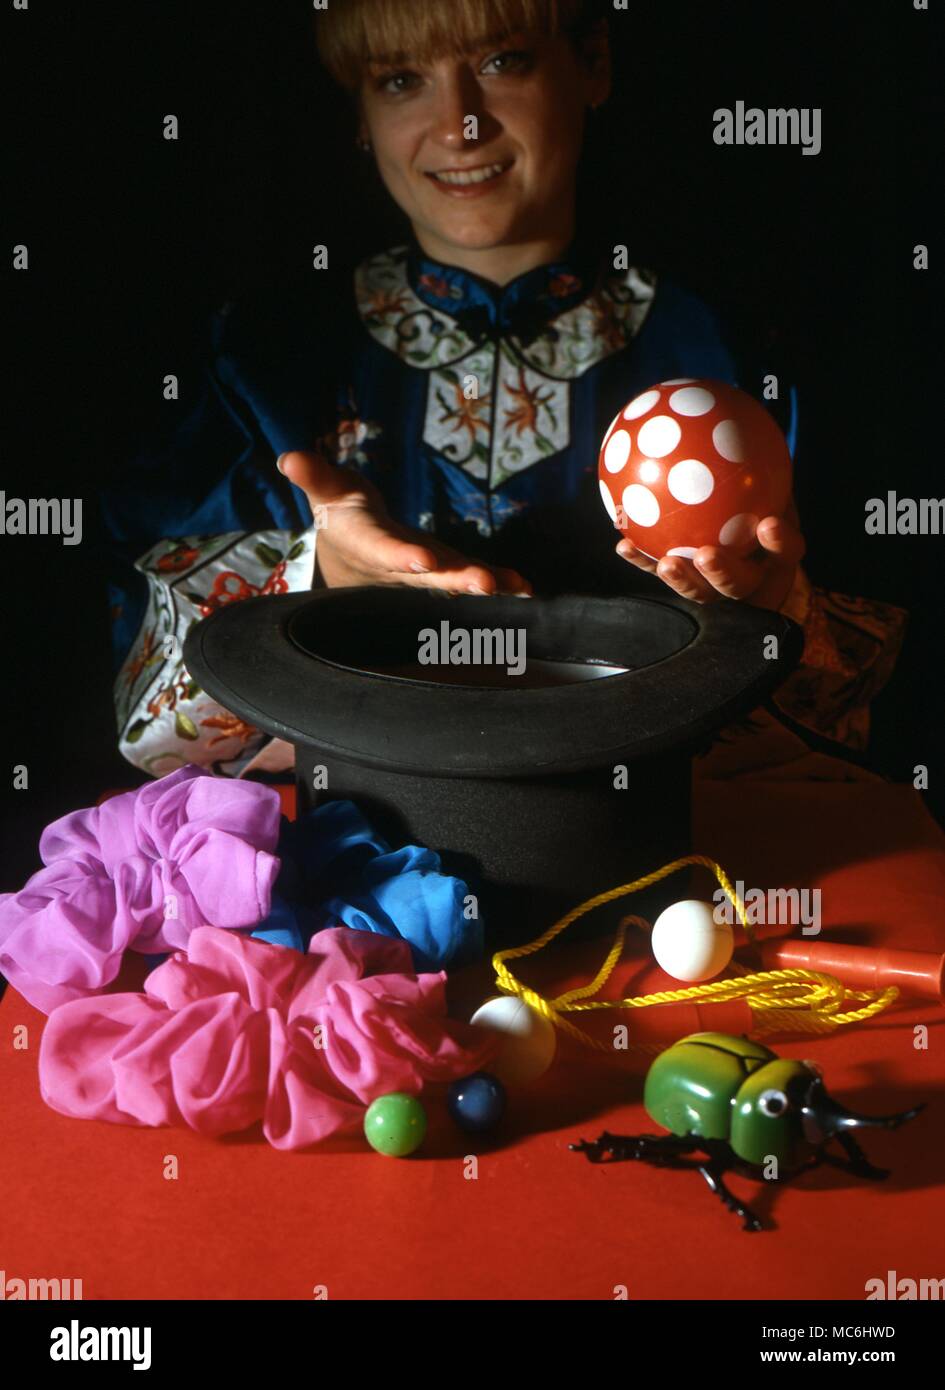 Stage Magic. The girl magician shows that the top hat is empty and then proceeds to take an enormous number of objects from it. Stock Photo